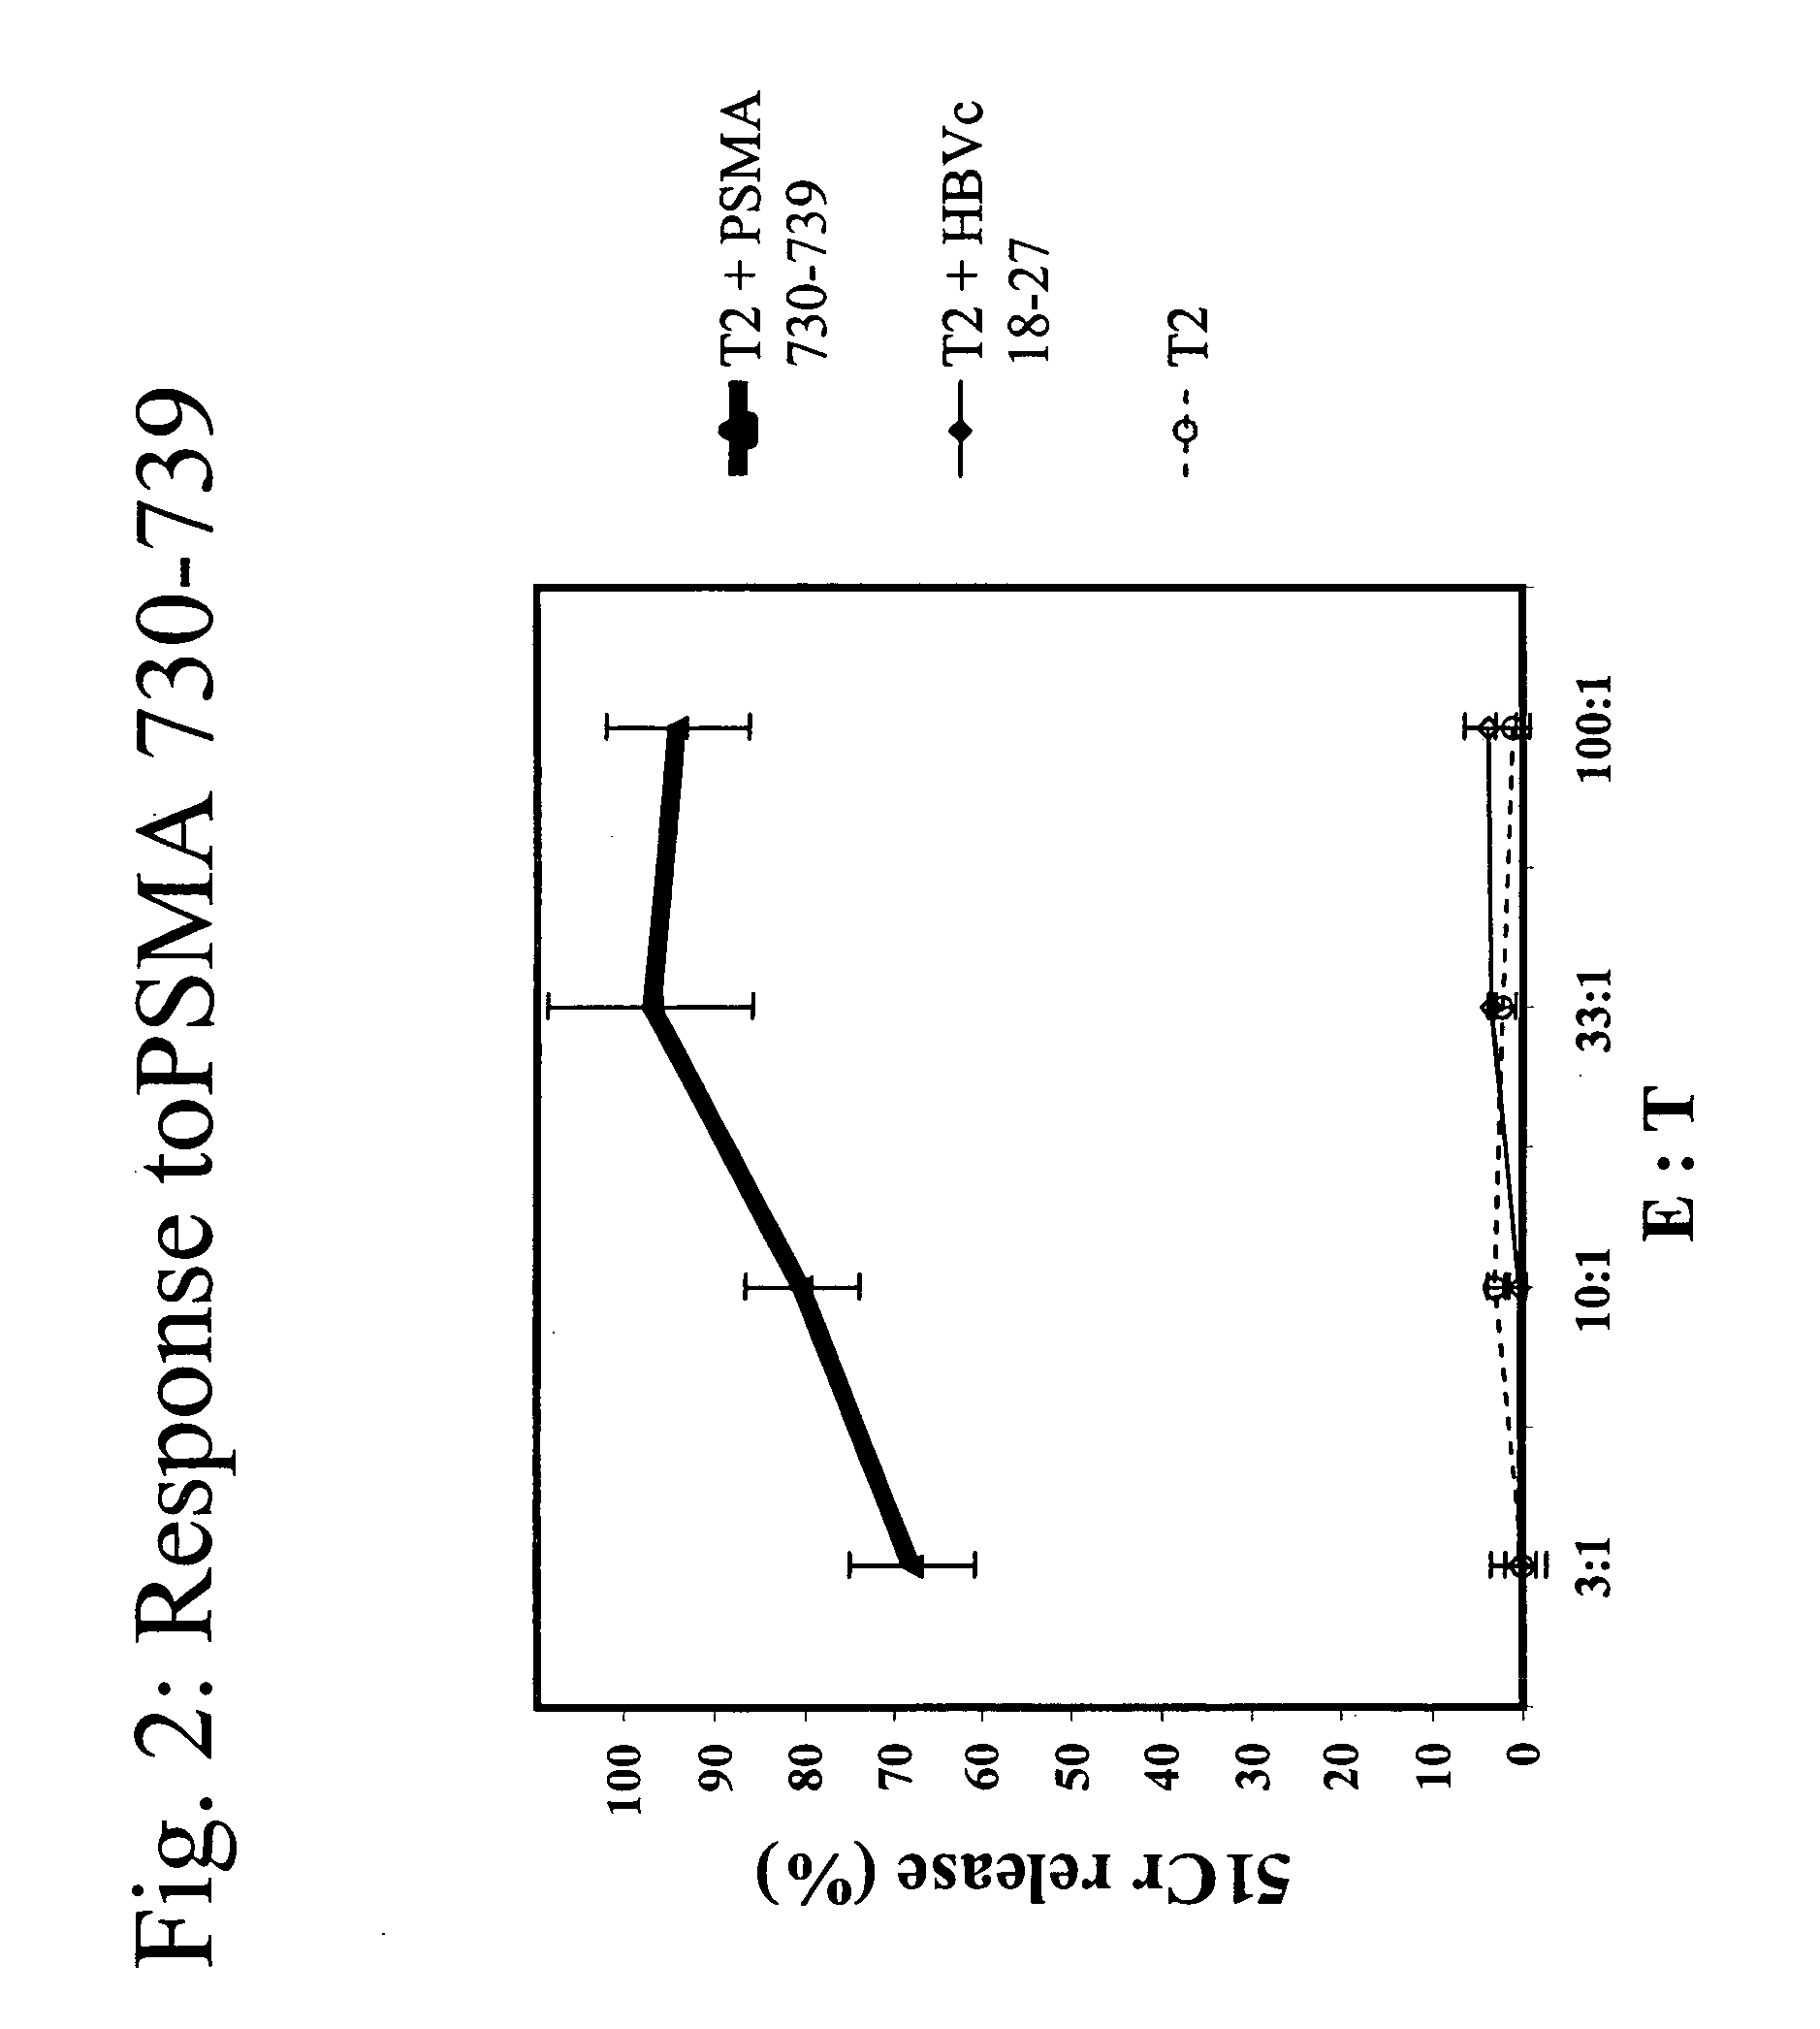 Methods to bypass CD4+ cells in the induction of an immune response